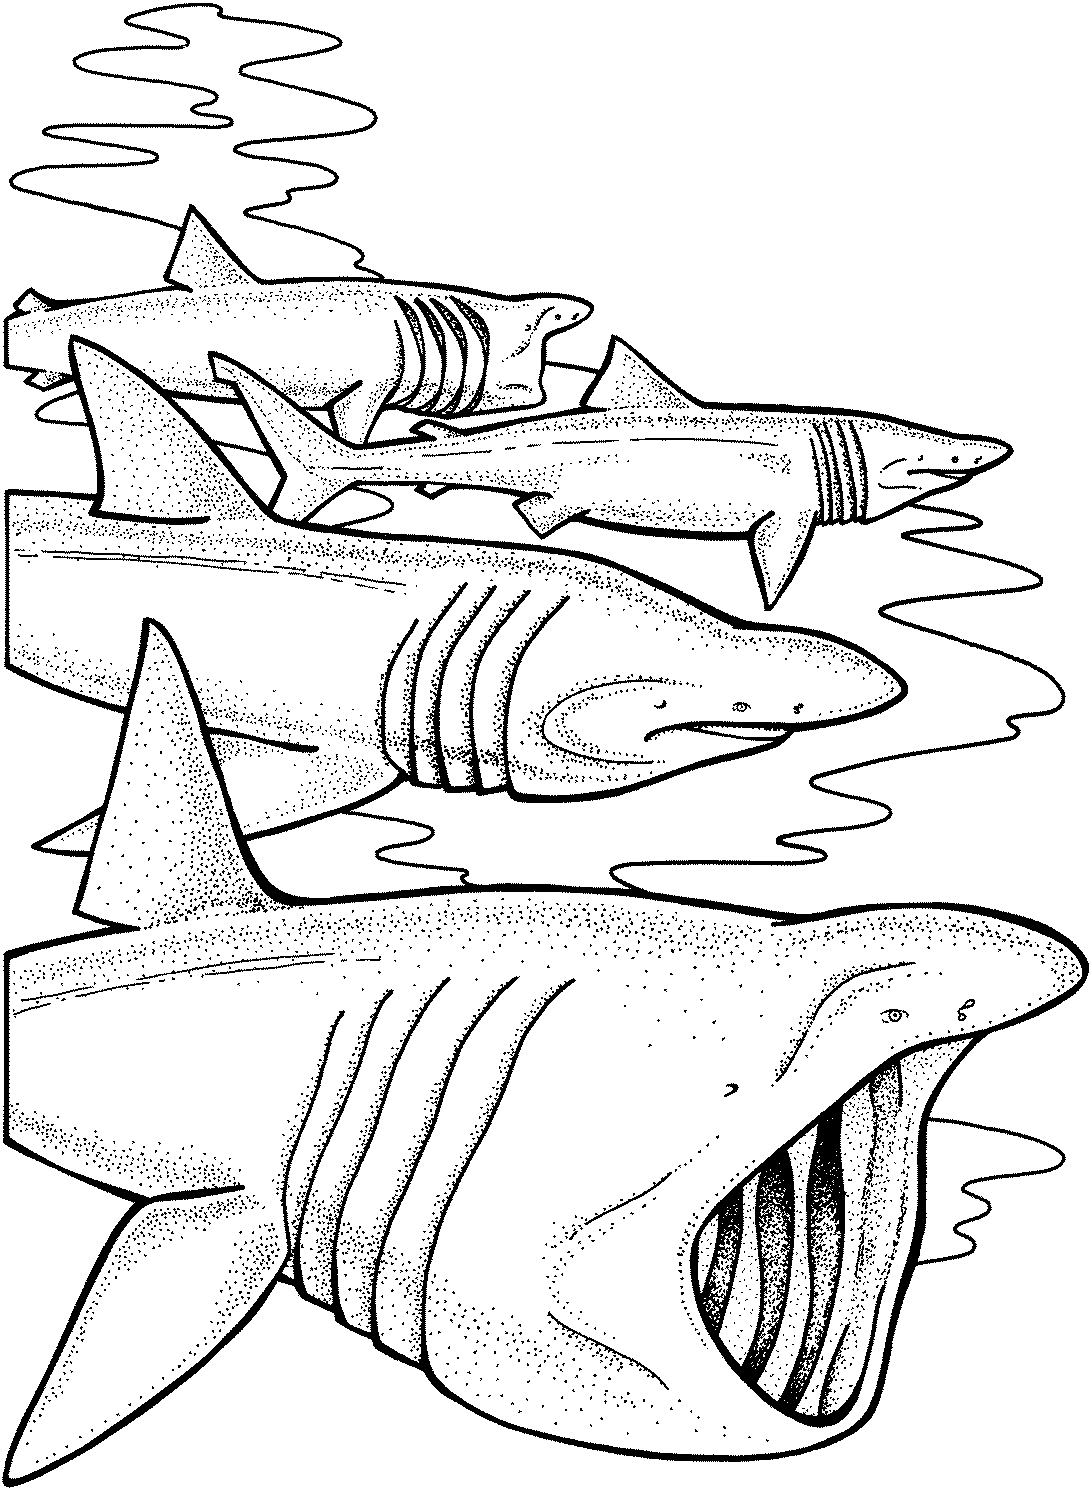 Basking sharks often swim in pairs or large groups Coloring Pages